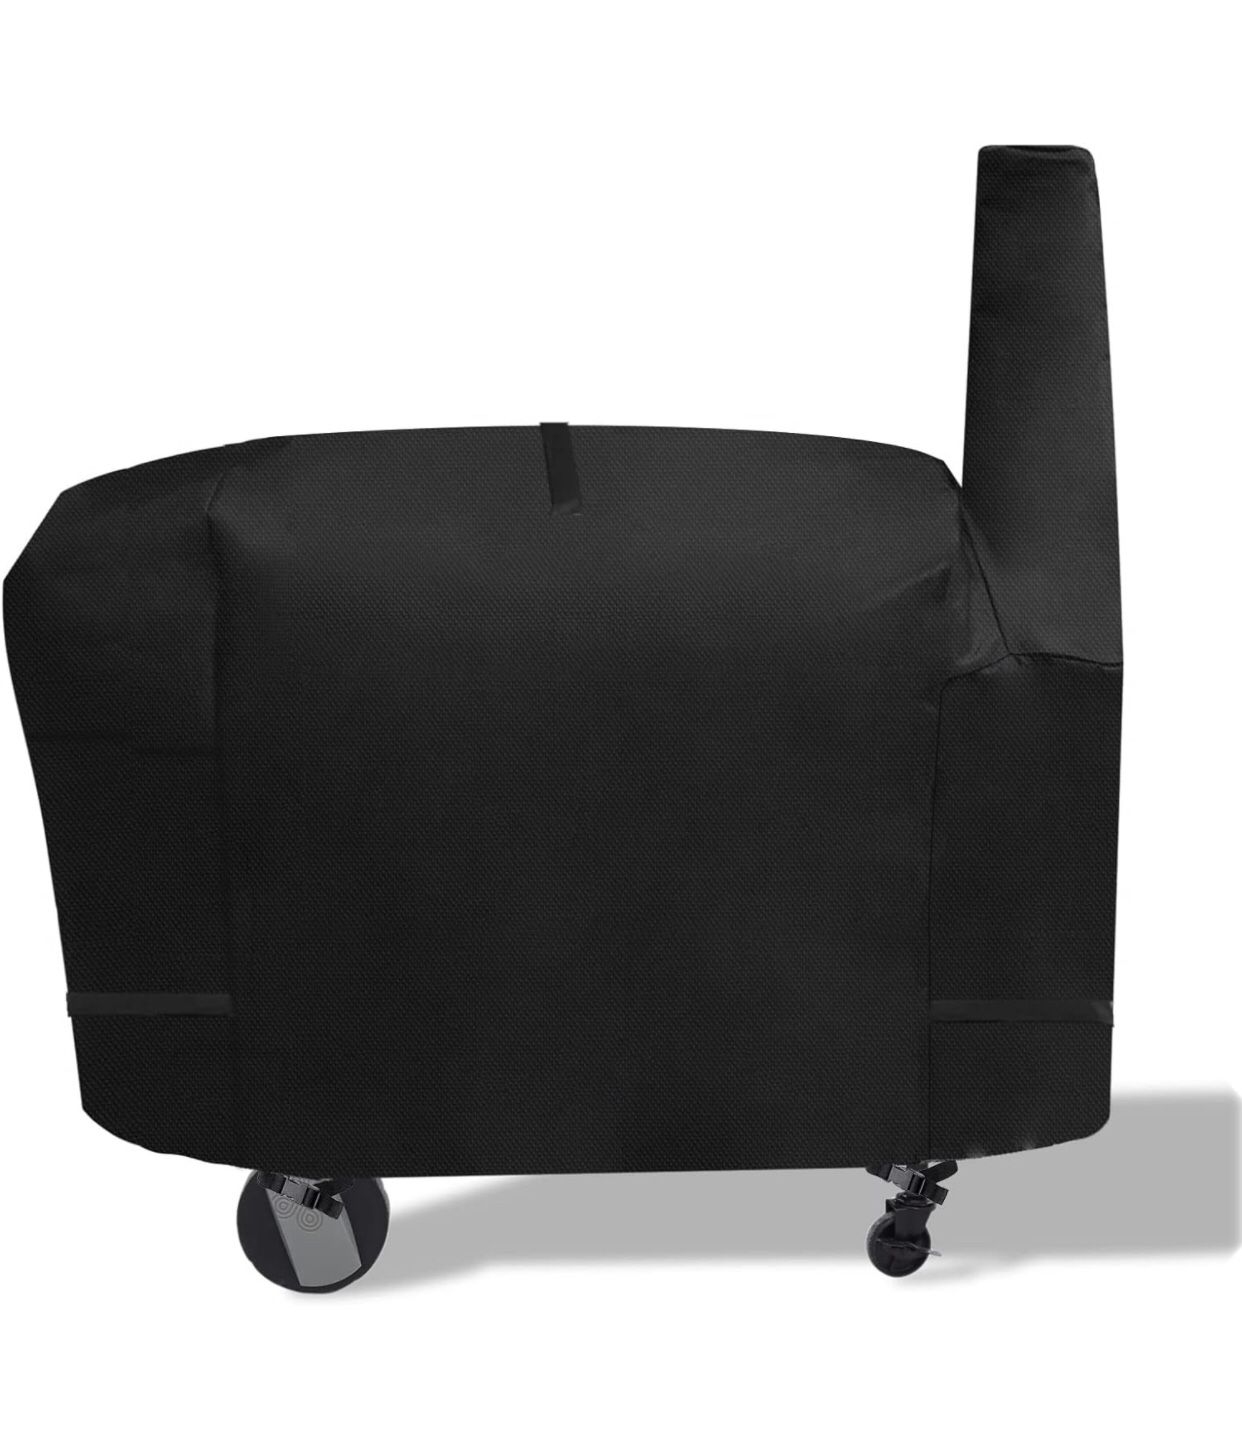 Grill Cover Compatible for Wood Pellet Grill and Smoker Full Length Barbecue Grill Cover All Weather Protection Black 62" Lx22 Wx41 H